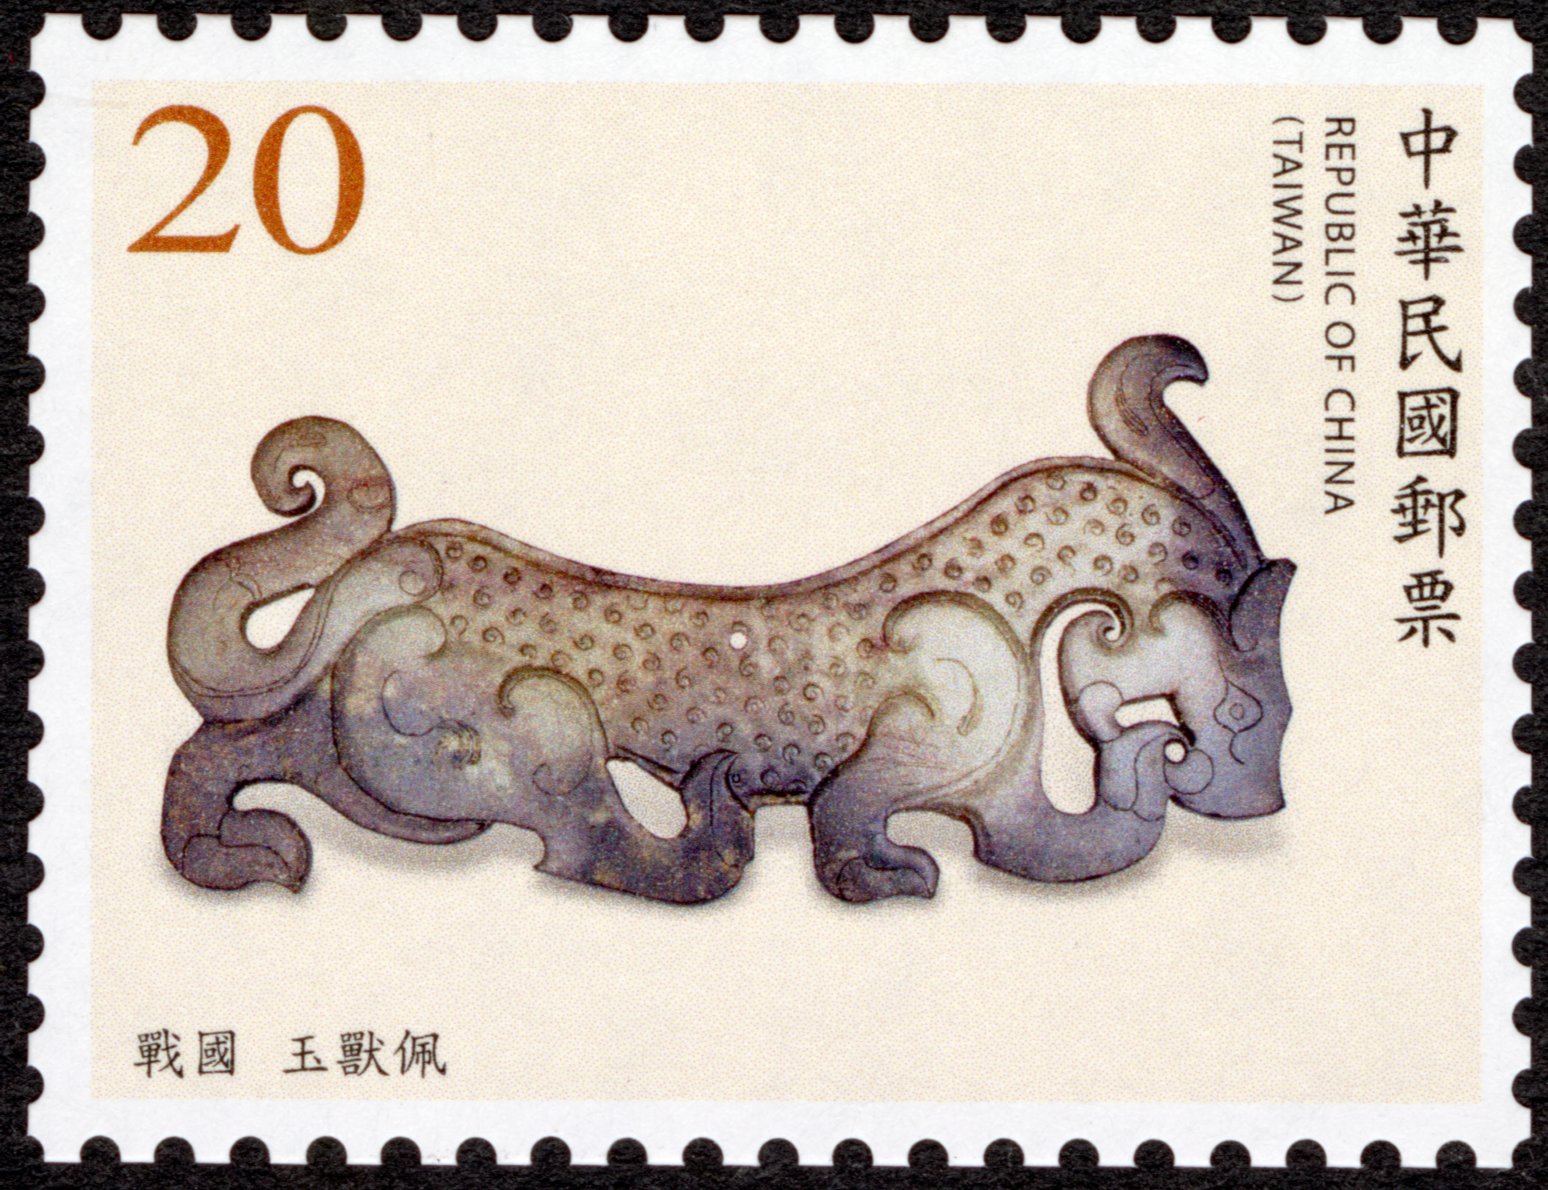 (Def.148.15)Def.148 Jade Articles from the National Palace Museum Postage Stamps (Continued III)